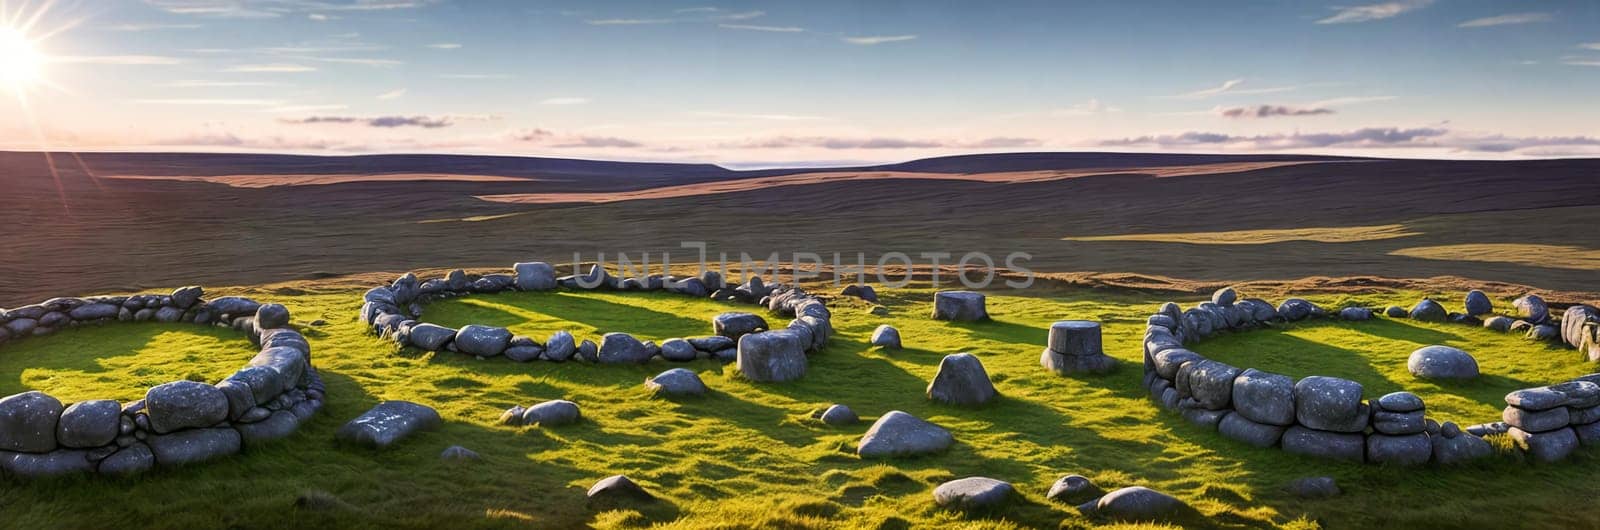 A mysterious and ancient stone circle nestled in a remote moorland, with the setting sun casting long shadows over the weathered monoliths